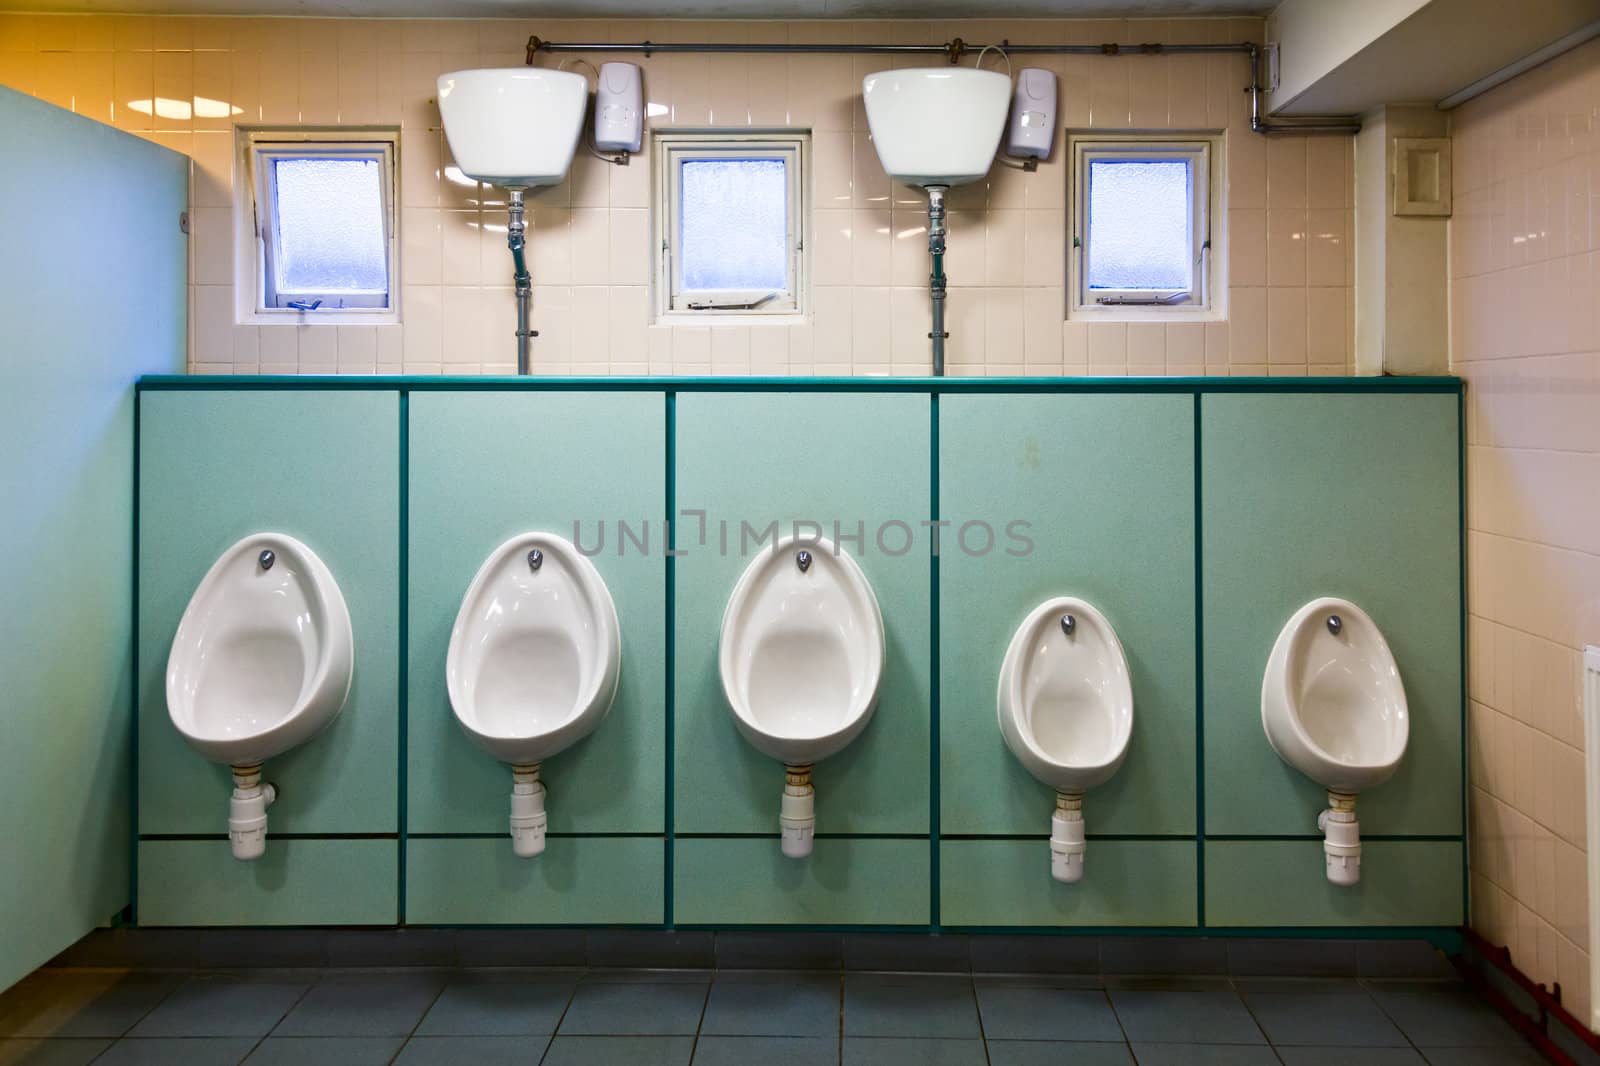 Empty public lavatory with urinals